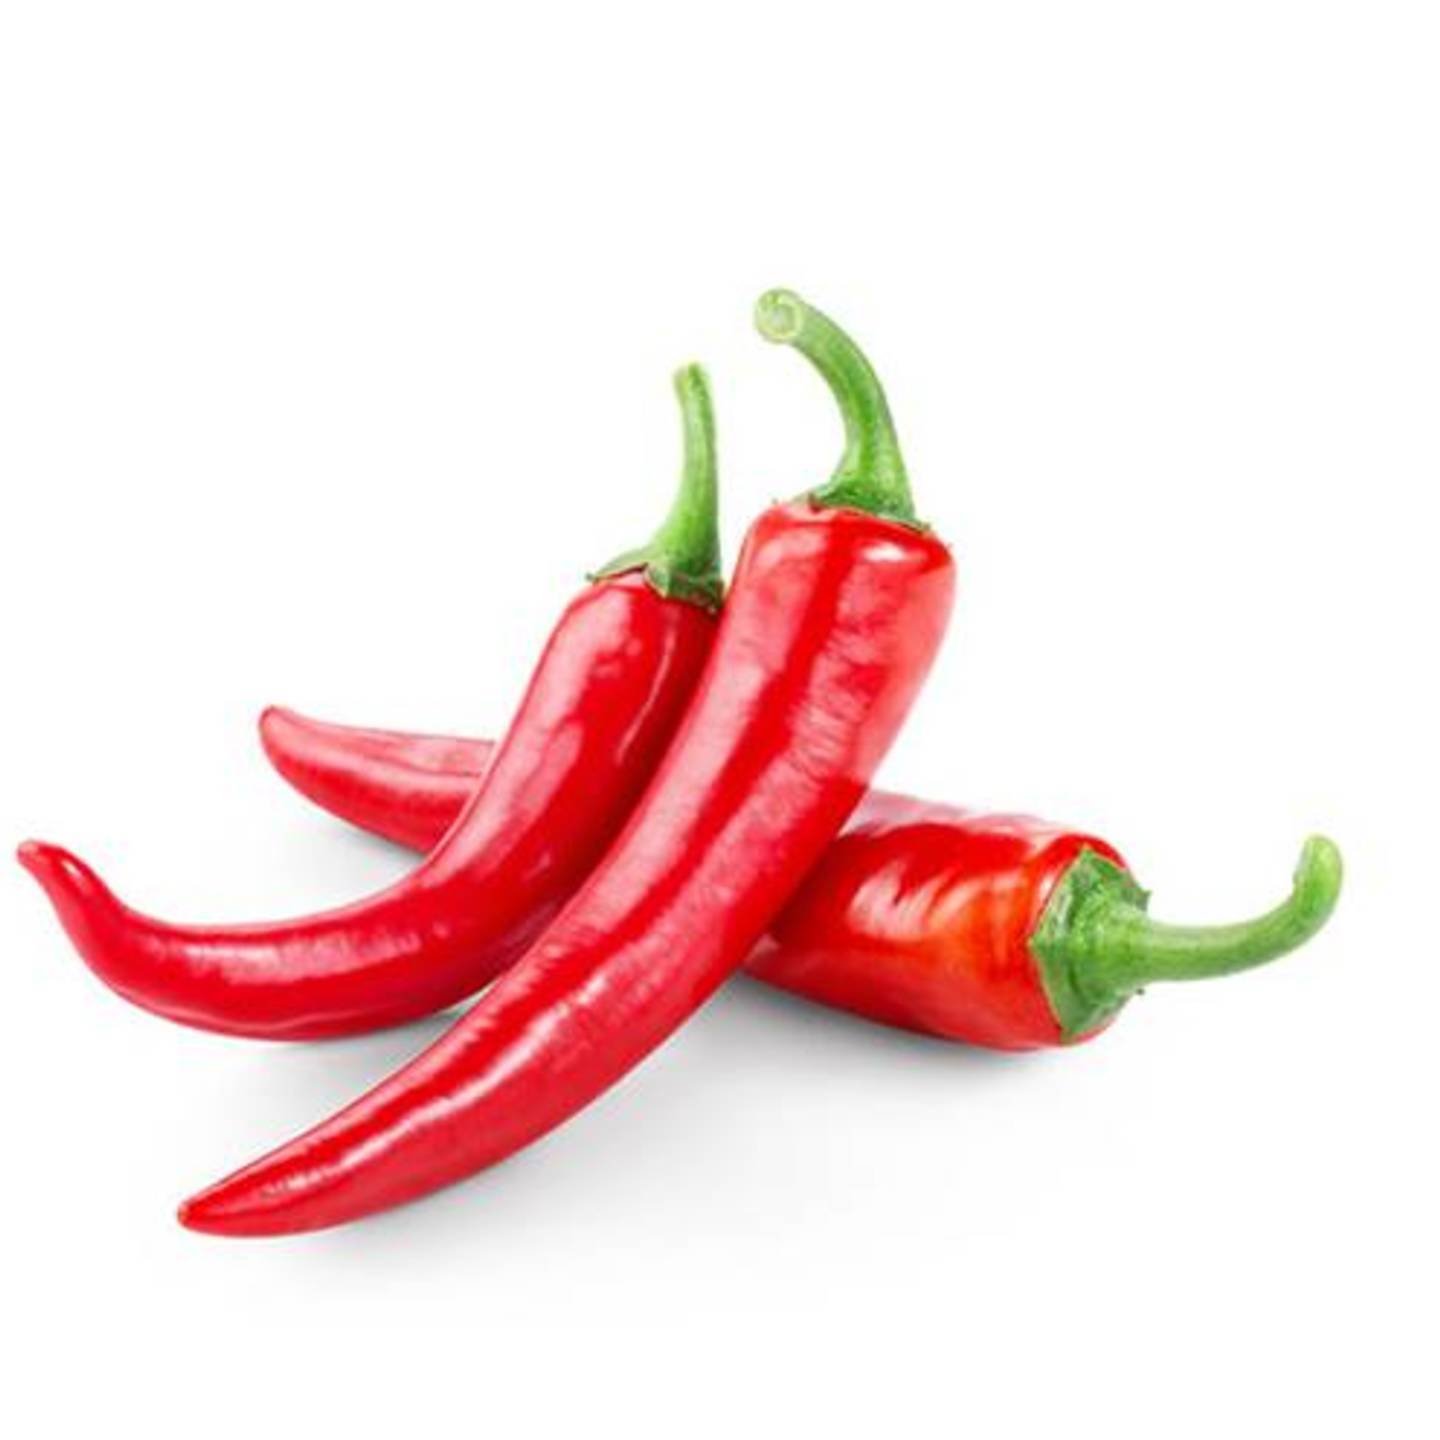 Red Chilies  Cili Merah - 1 pack